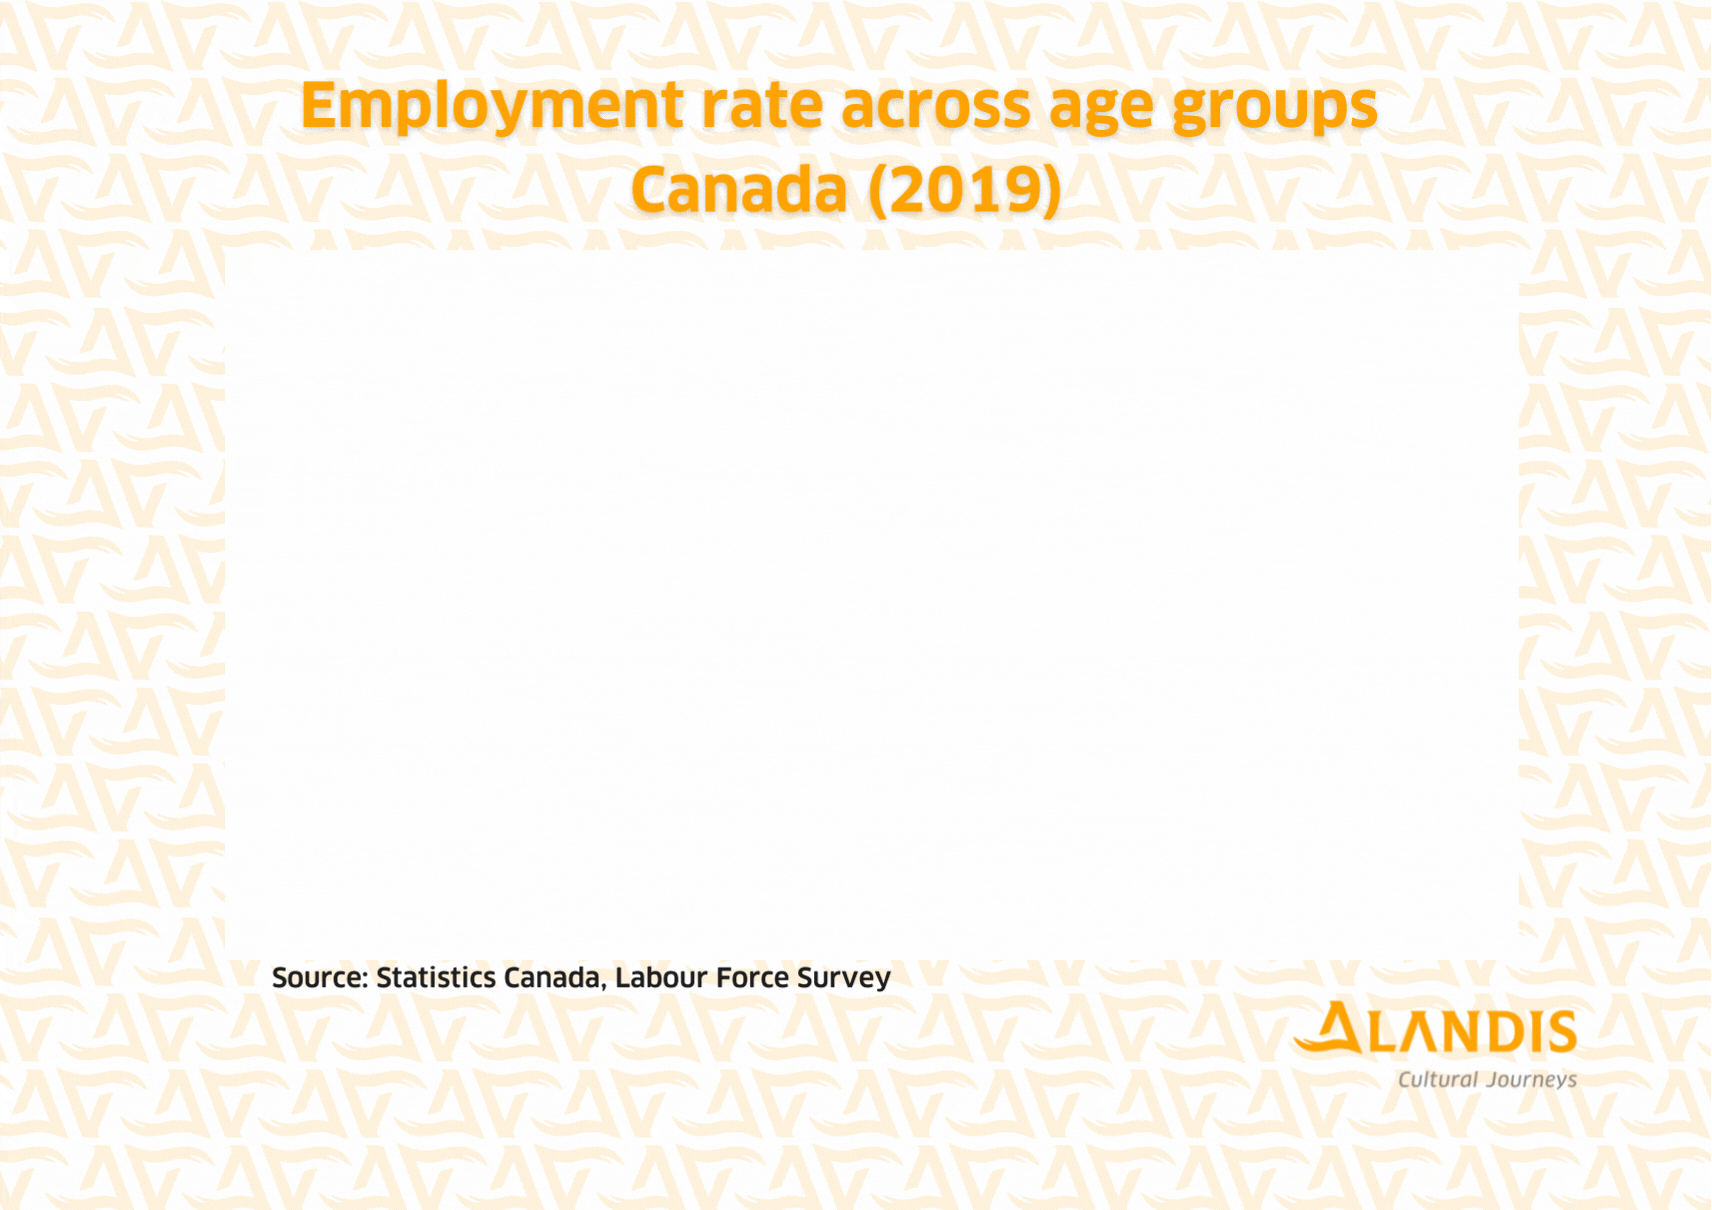 Chart of employment rate across age groups in Canada